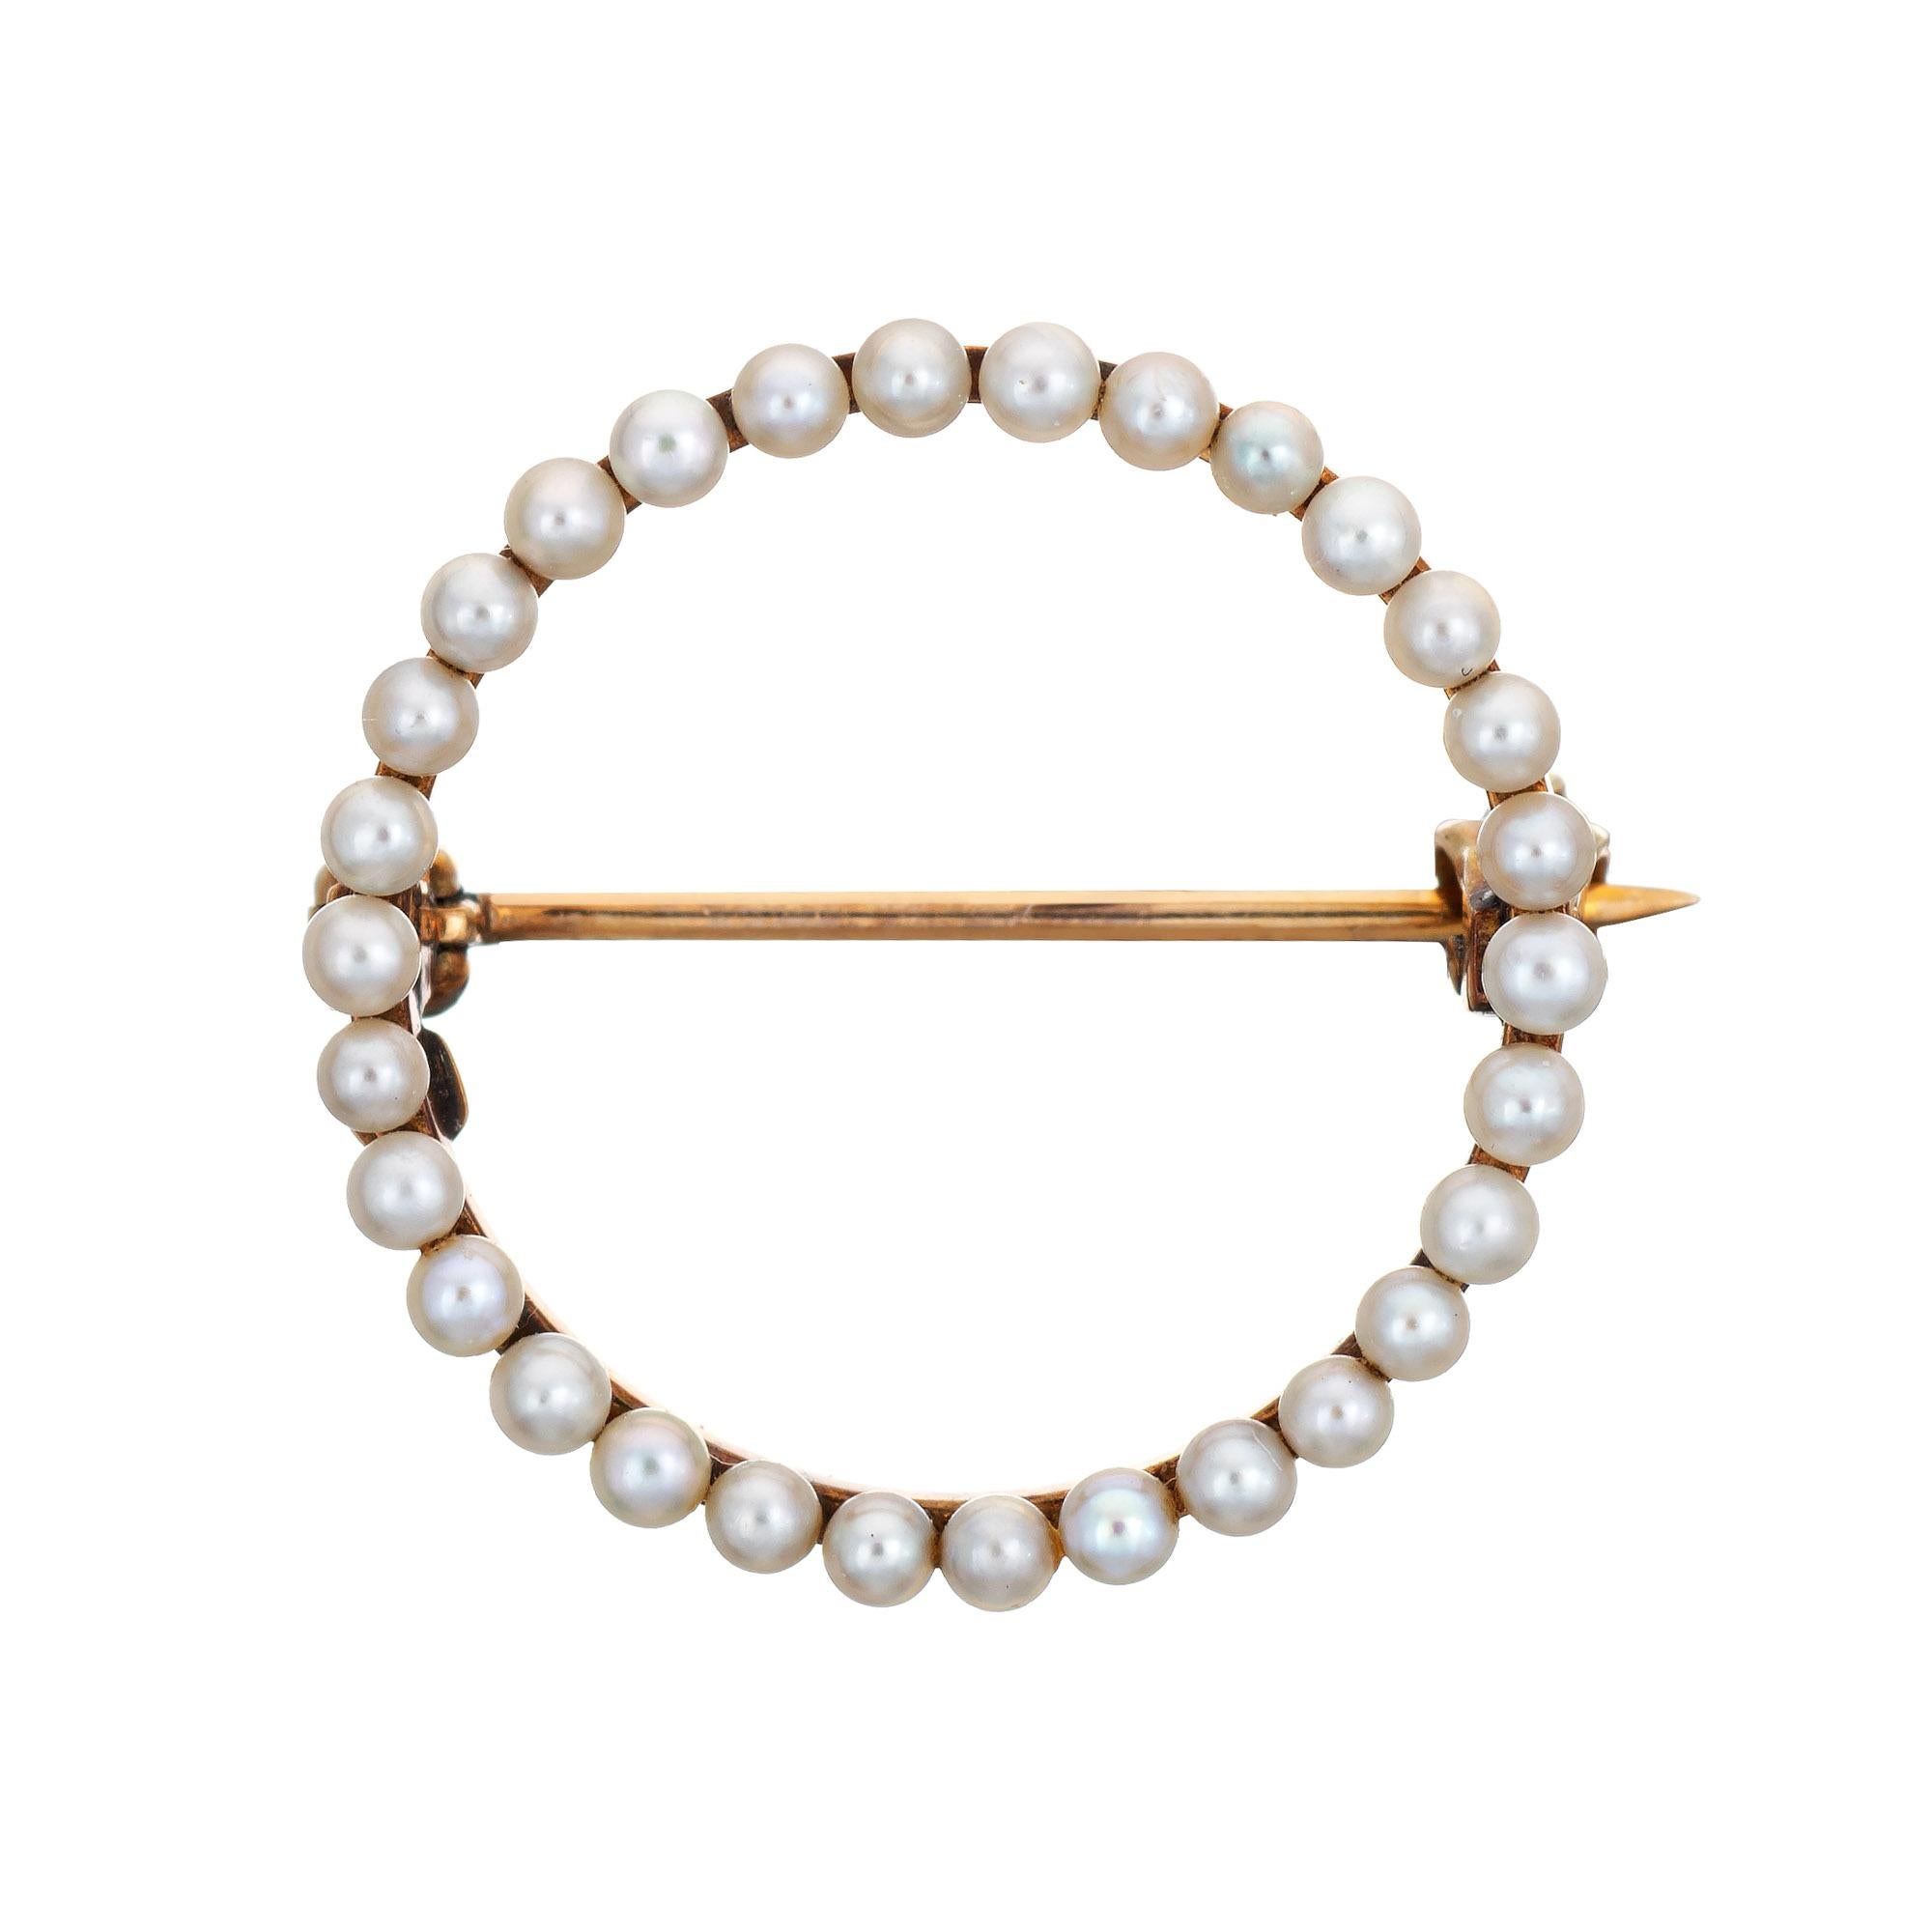 Finely detailed antique Edwardian era brooch (circa 1900s to 1910s), crafted in 14 karat yellow gold.

31 seed pearls each measure 2mm. The pearls are well matching and show rose over tones.
 
The sweet circle brooch measures 3/4 inch diameter.